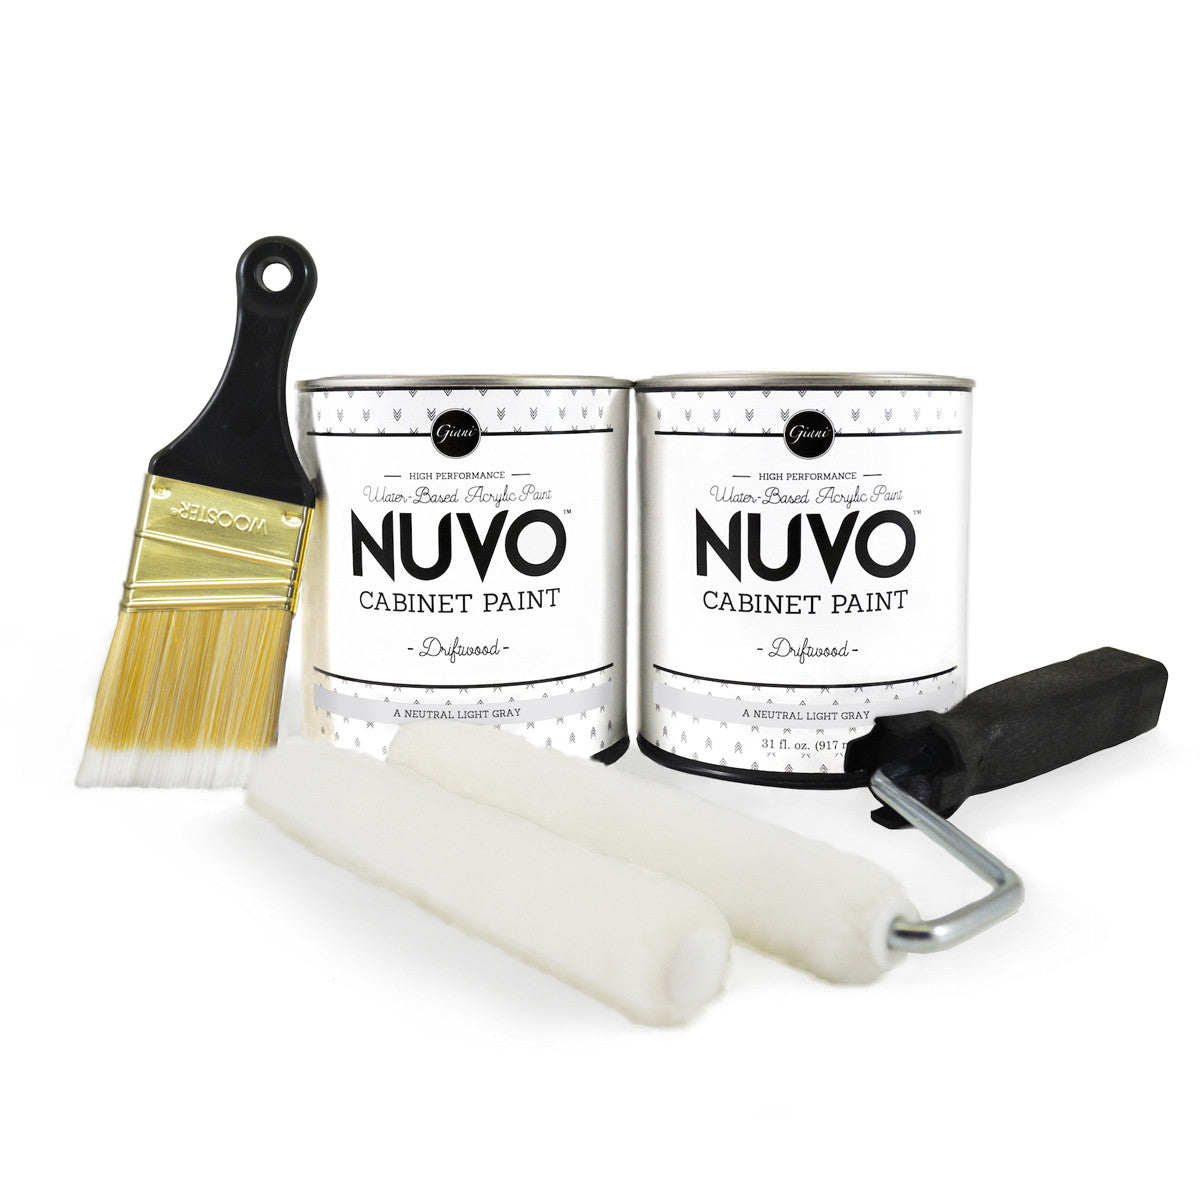 Nuvo Driftwood Cabinet Paint Kit